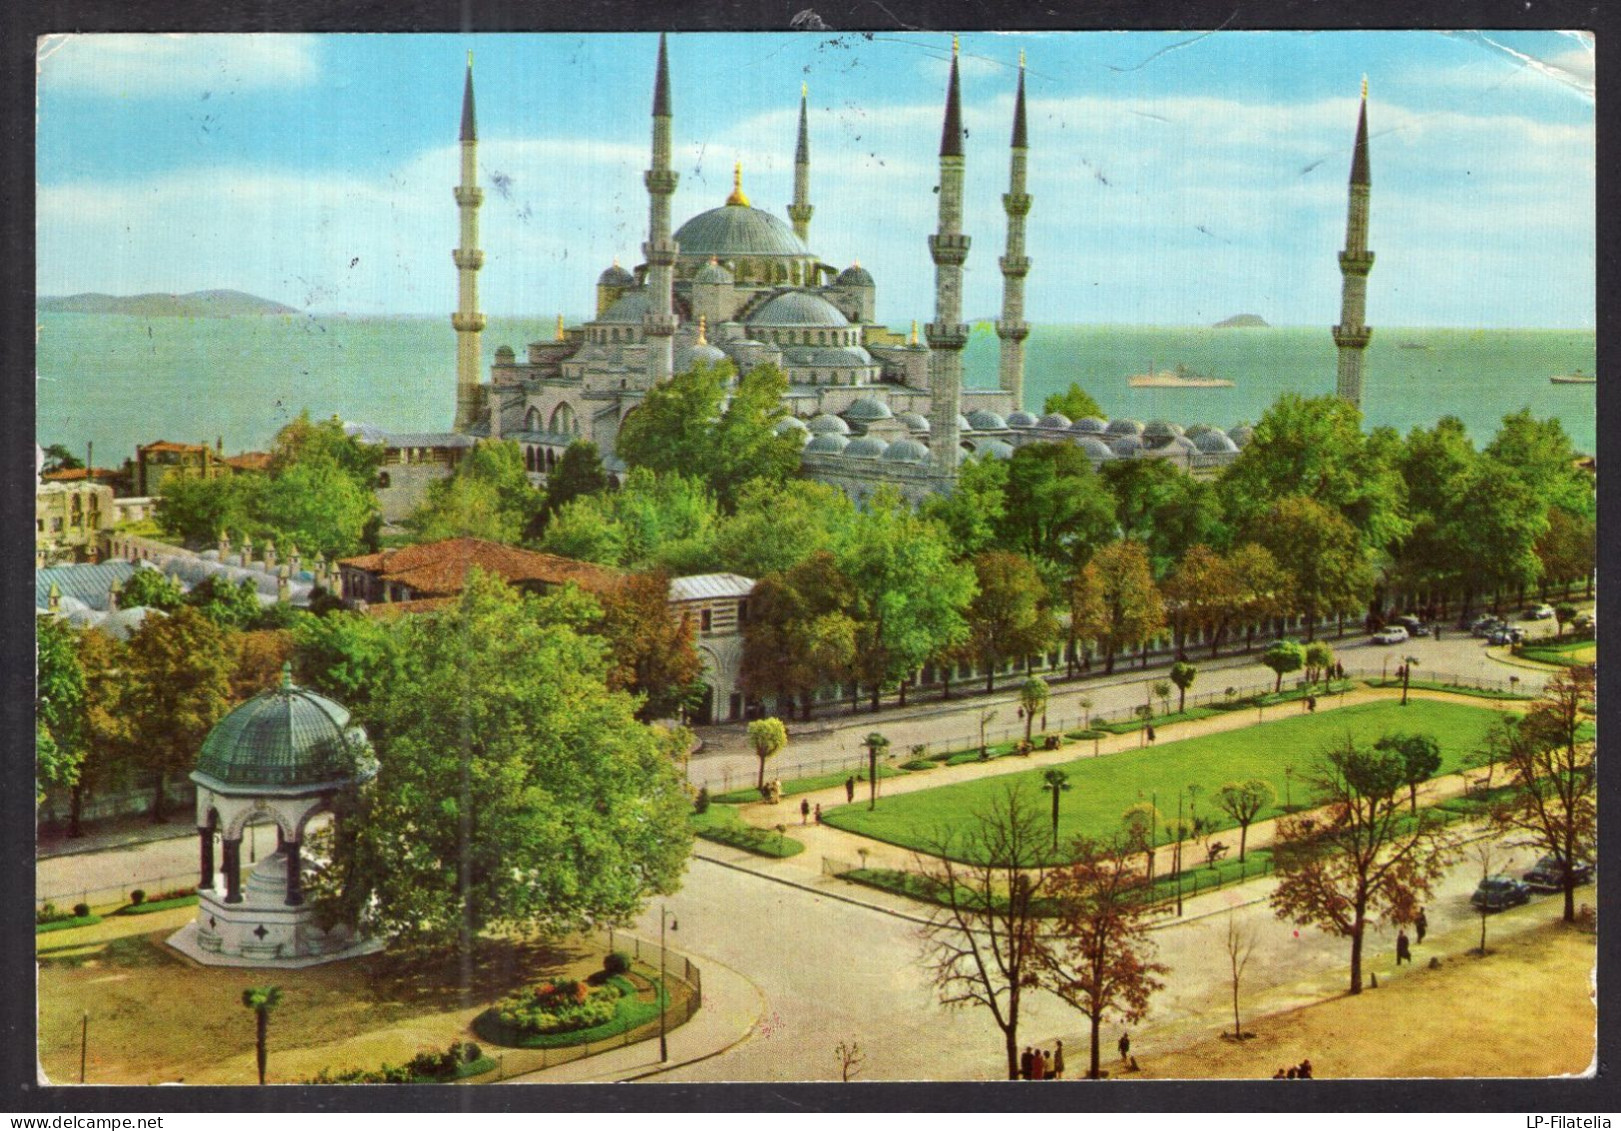 Turkey - 1978 - Istambul - The Blue Mosque And German Fountain - Turquia